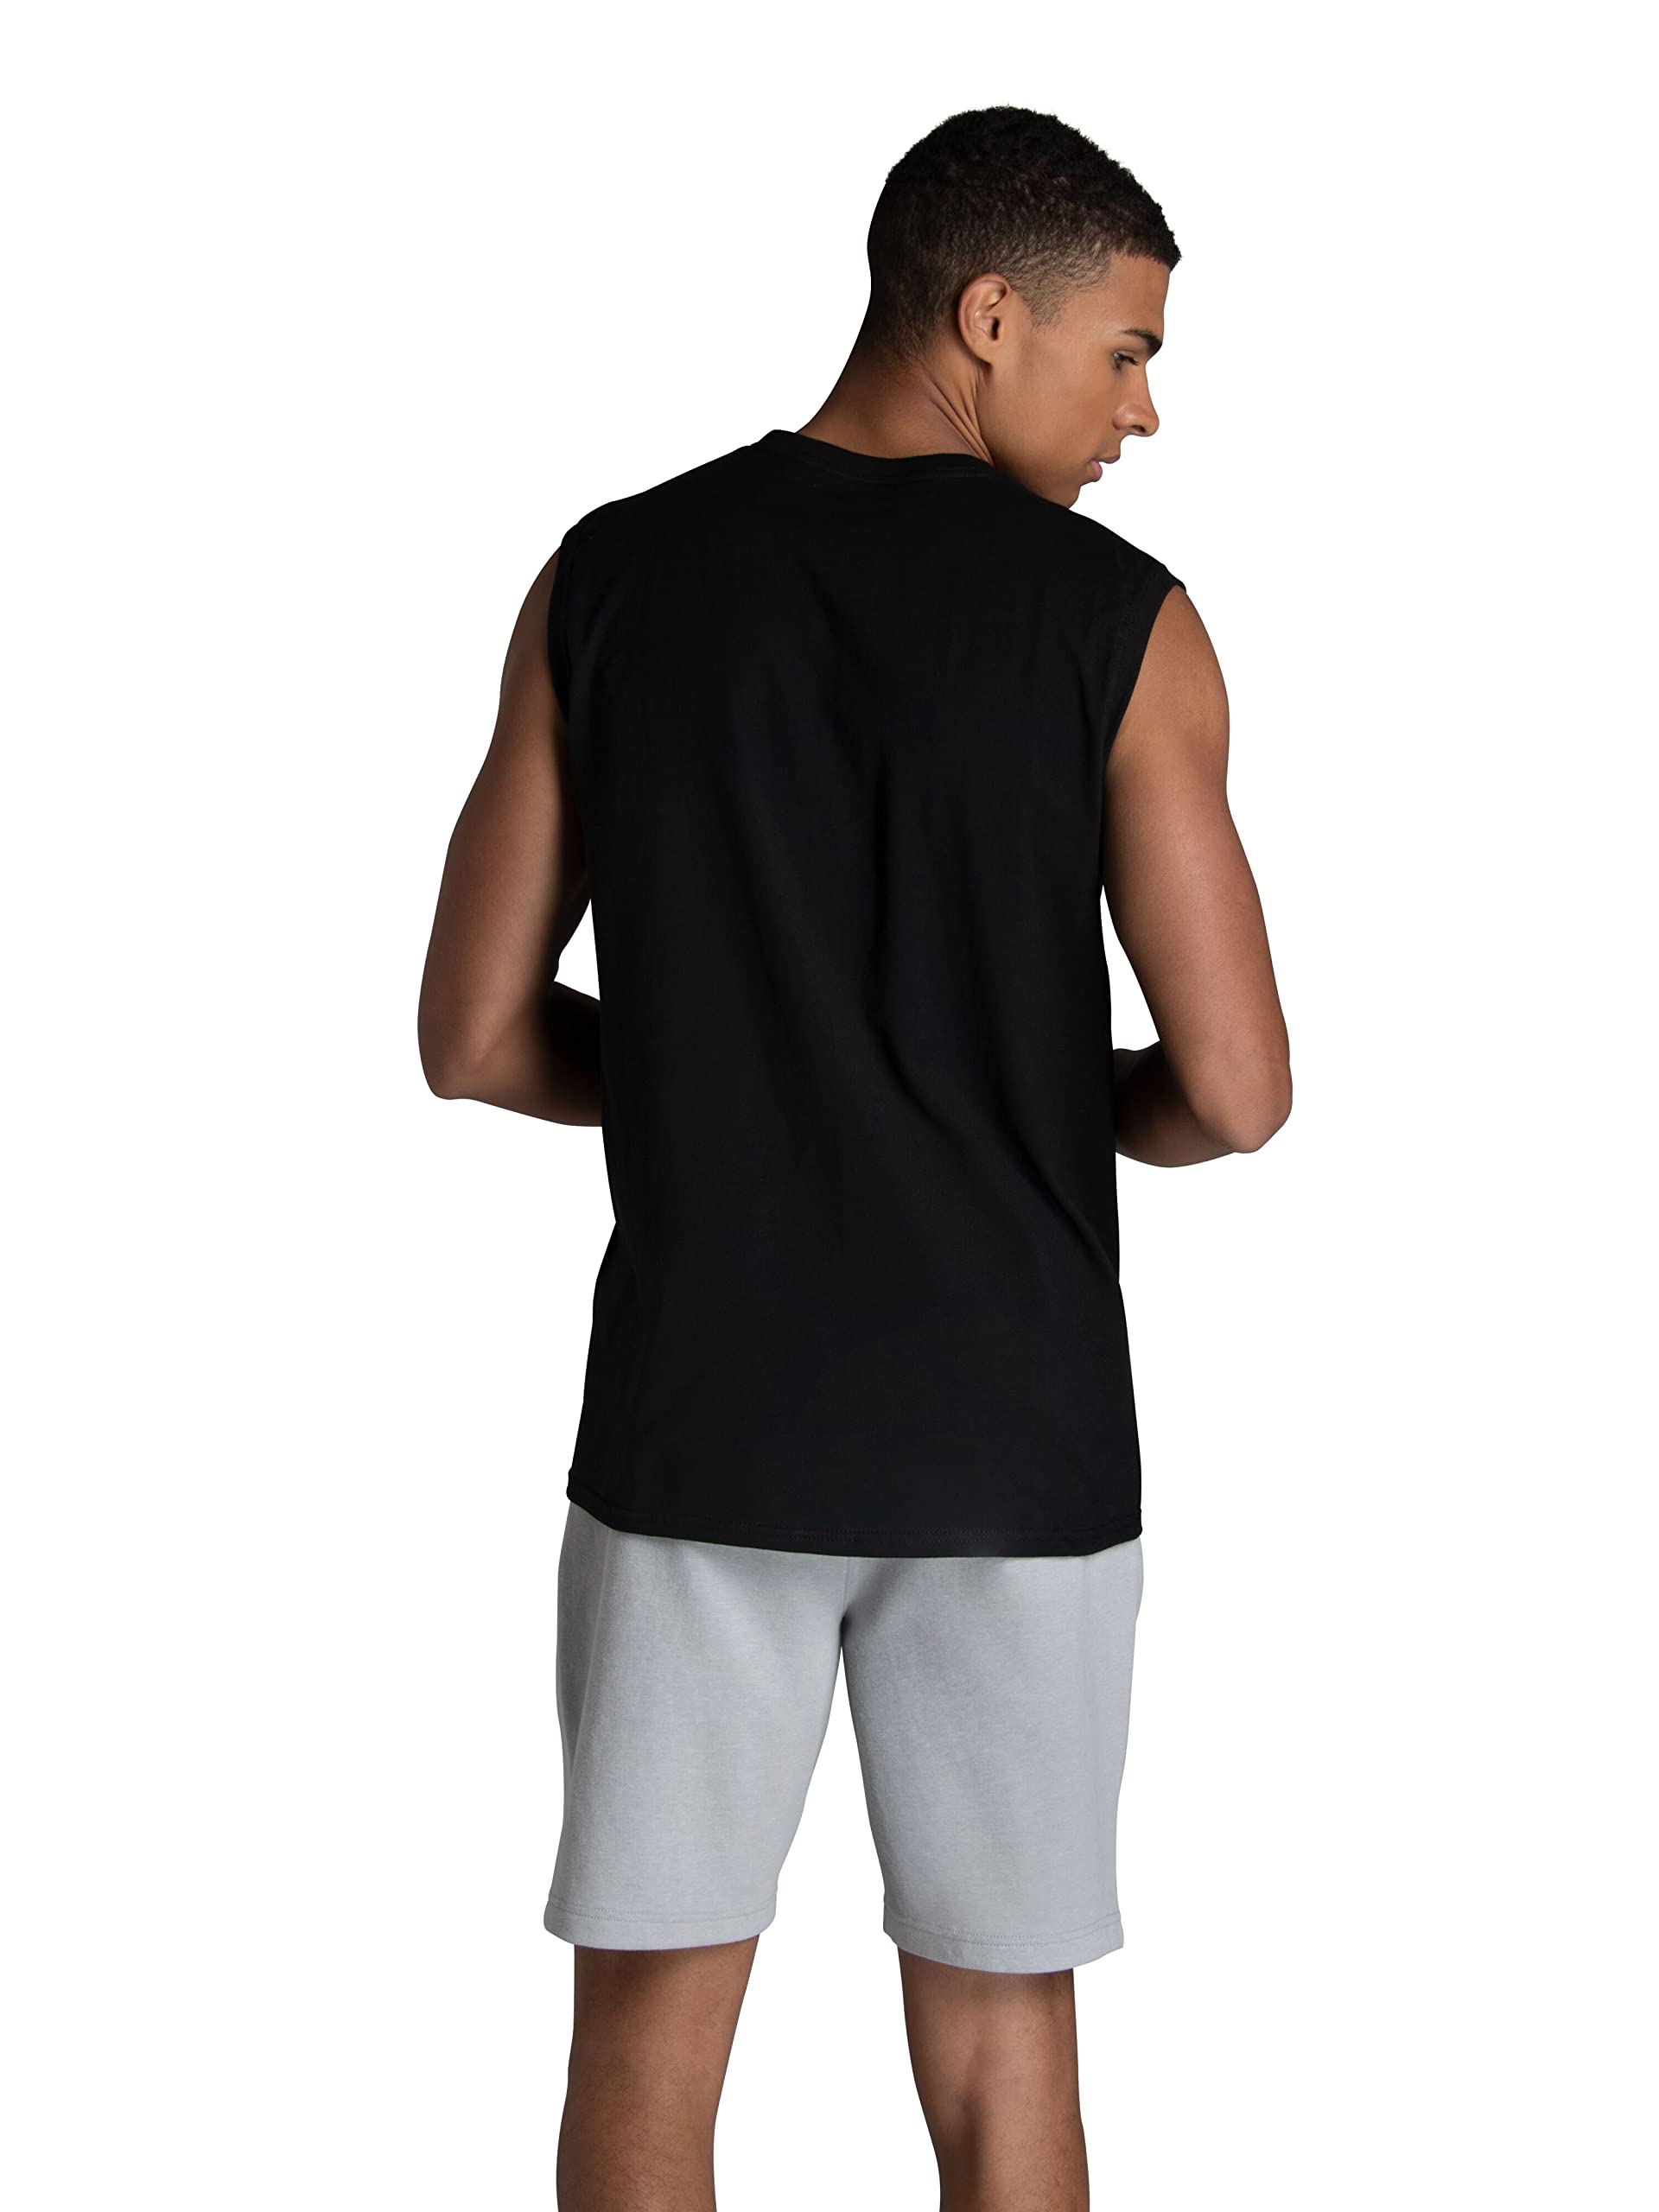 Fruit of the Loom Men's Eversoft Cotton Sleeveless T Shirts, Breathable & Moisture Wicking with Odor Control, Sizes S-4x